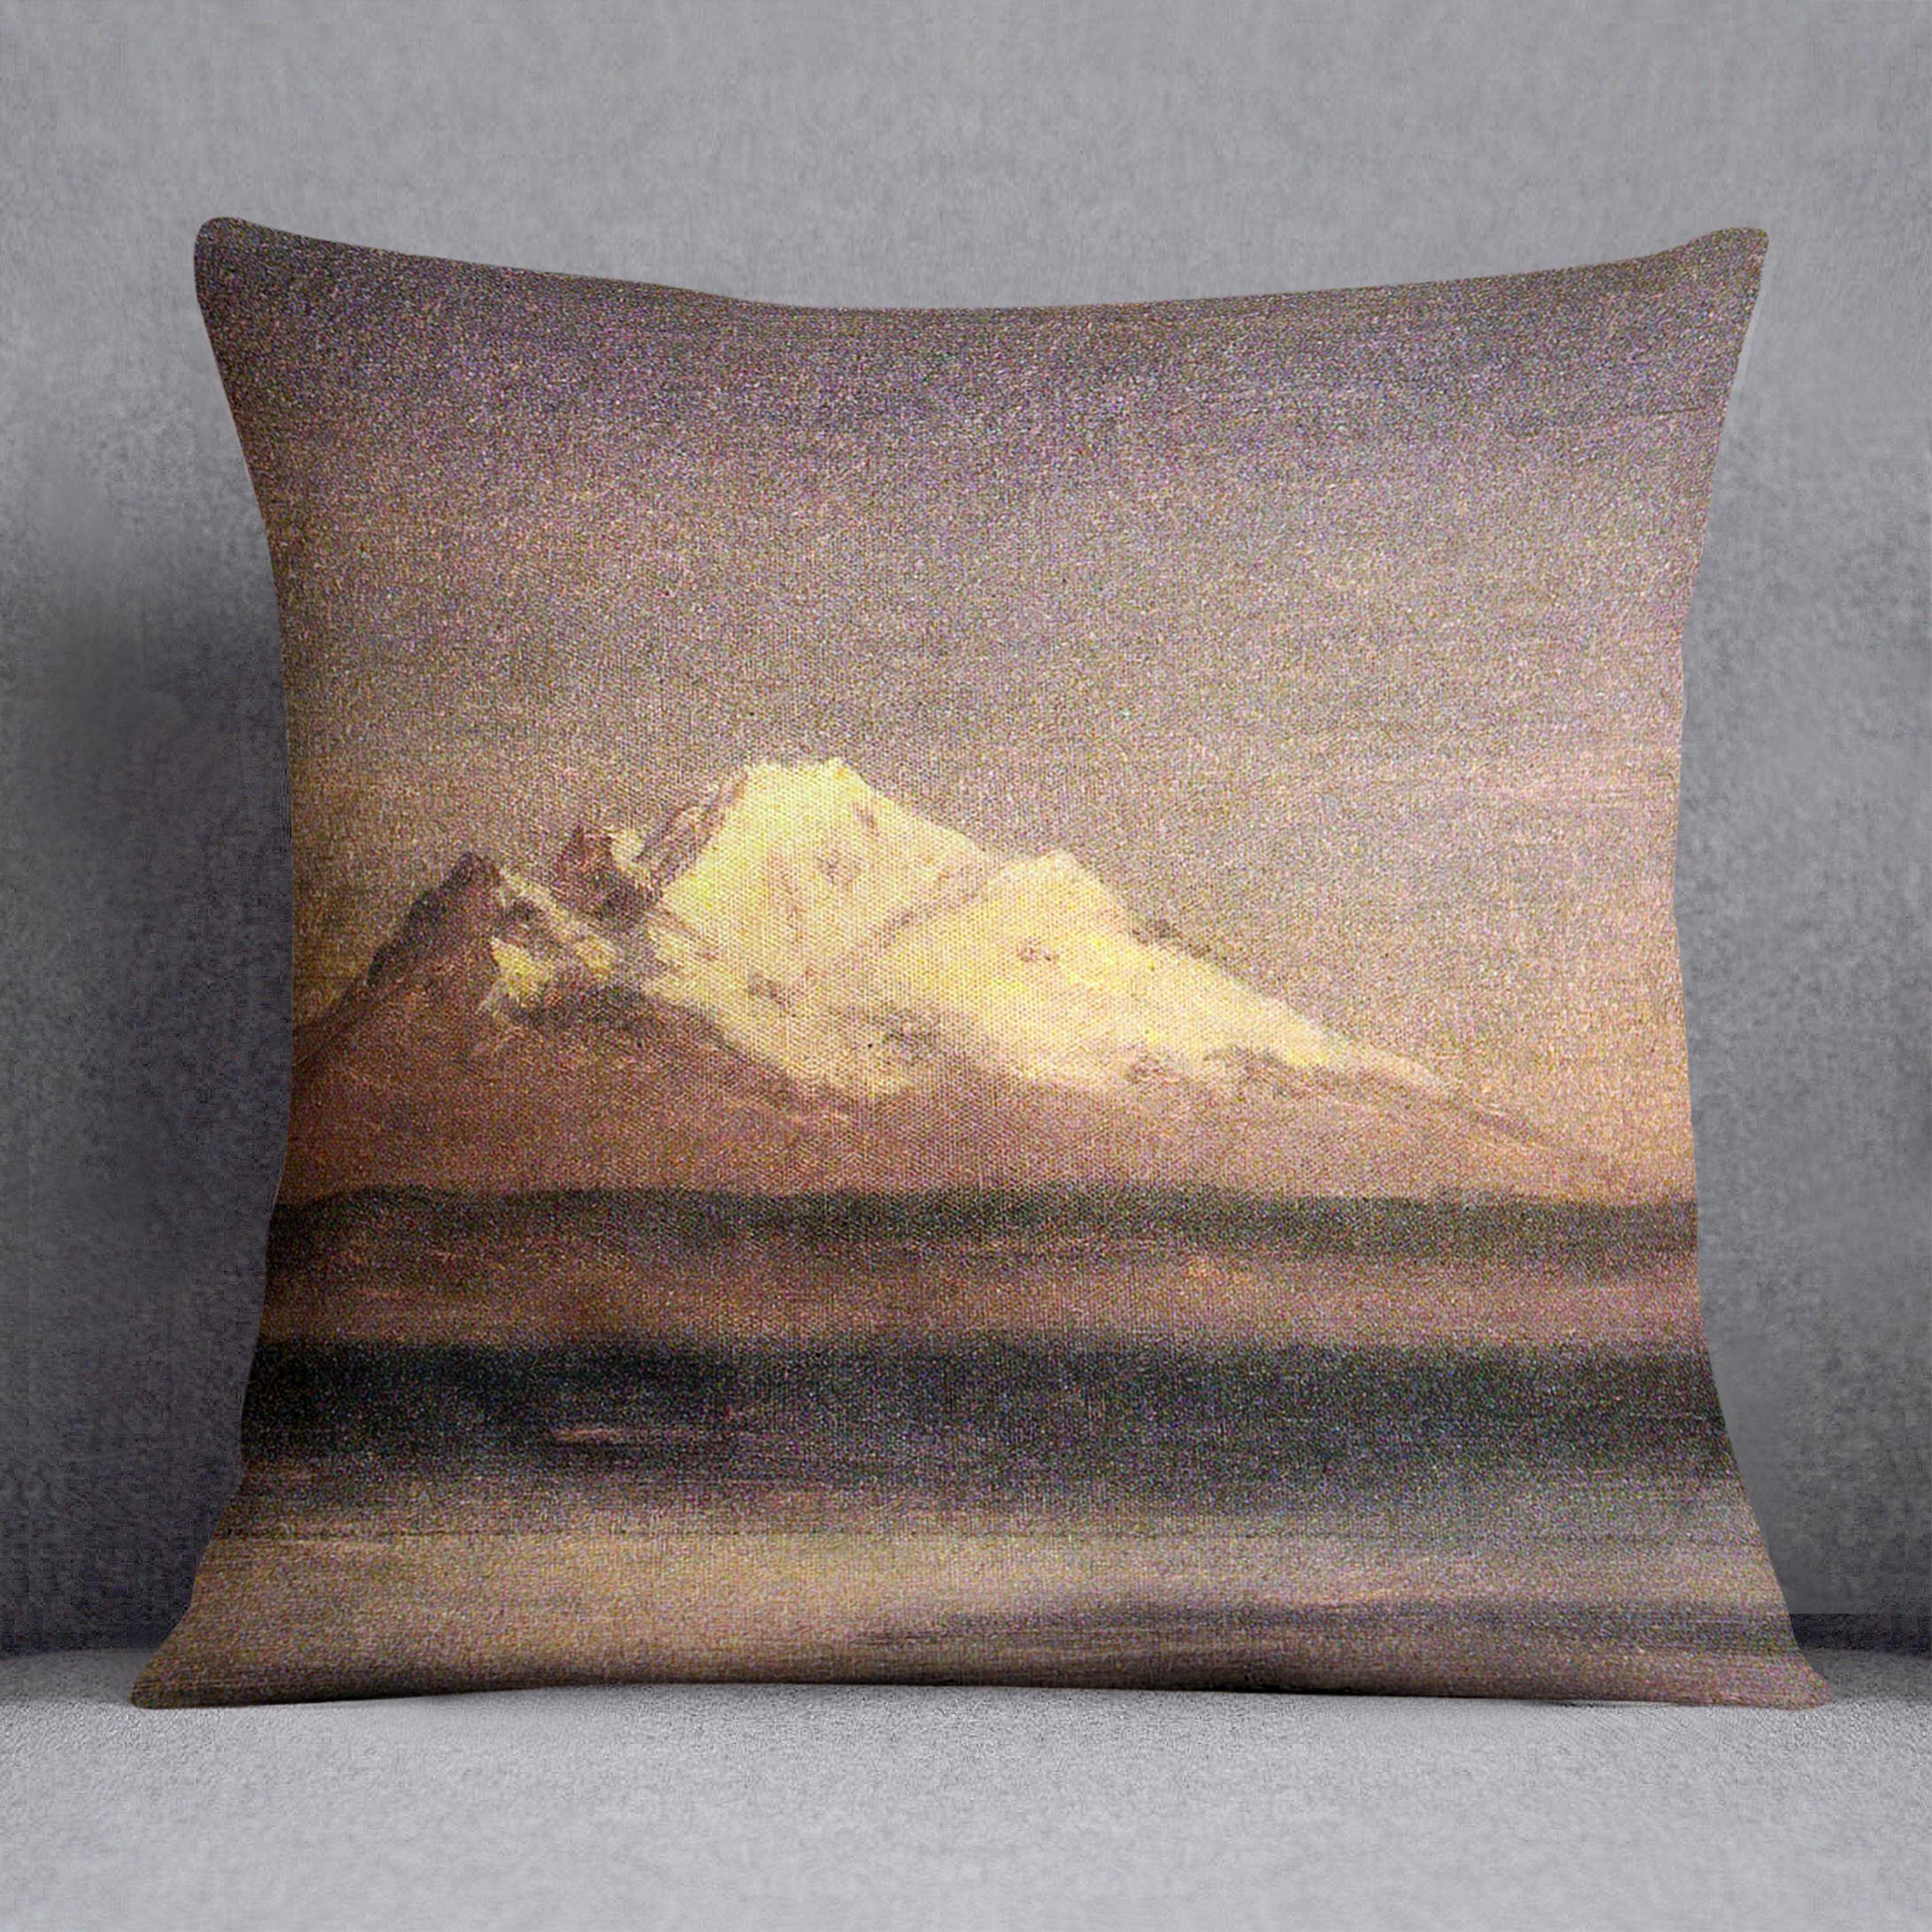 Snowy Mountains in the Pacific Northwest 2 by Bierstadt Cushion - Canvas Art Rocks - 1